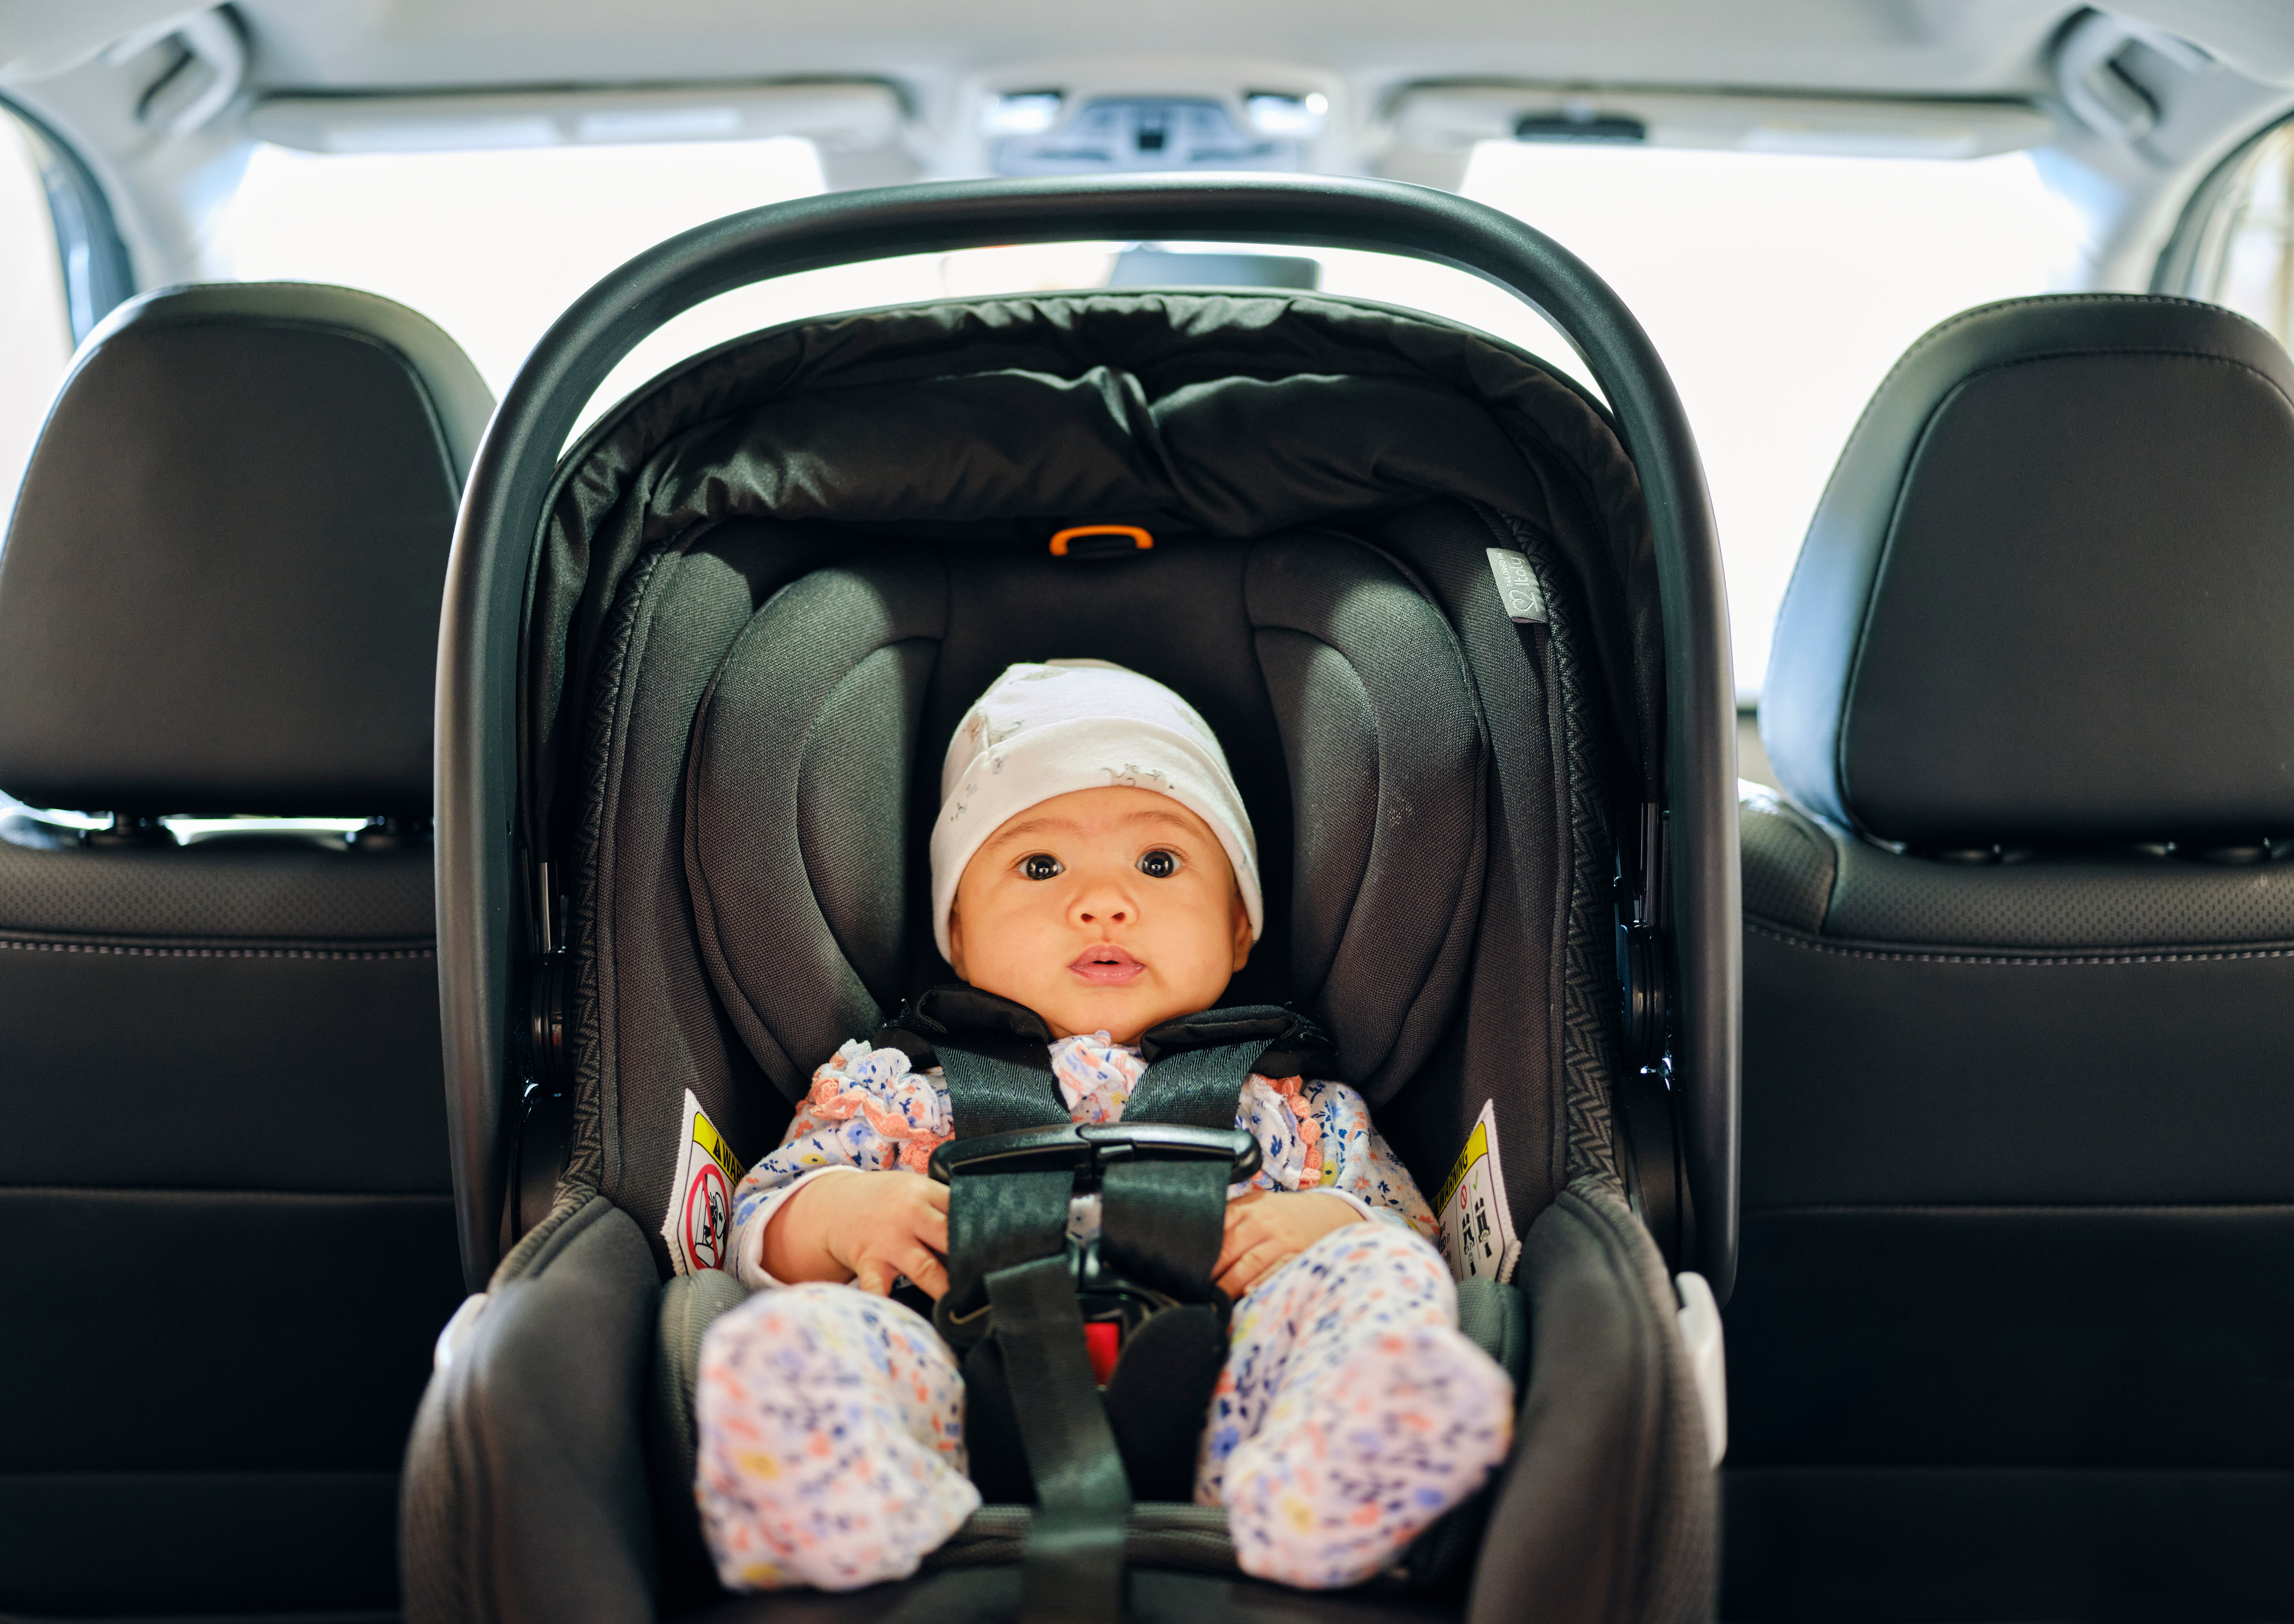 Woman reveals how car seat saved her baby’s life